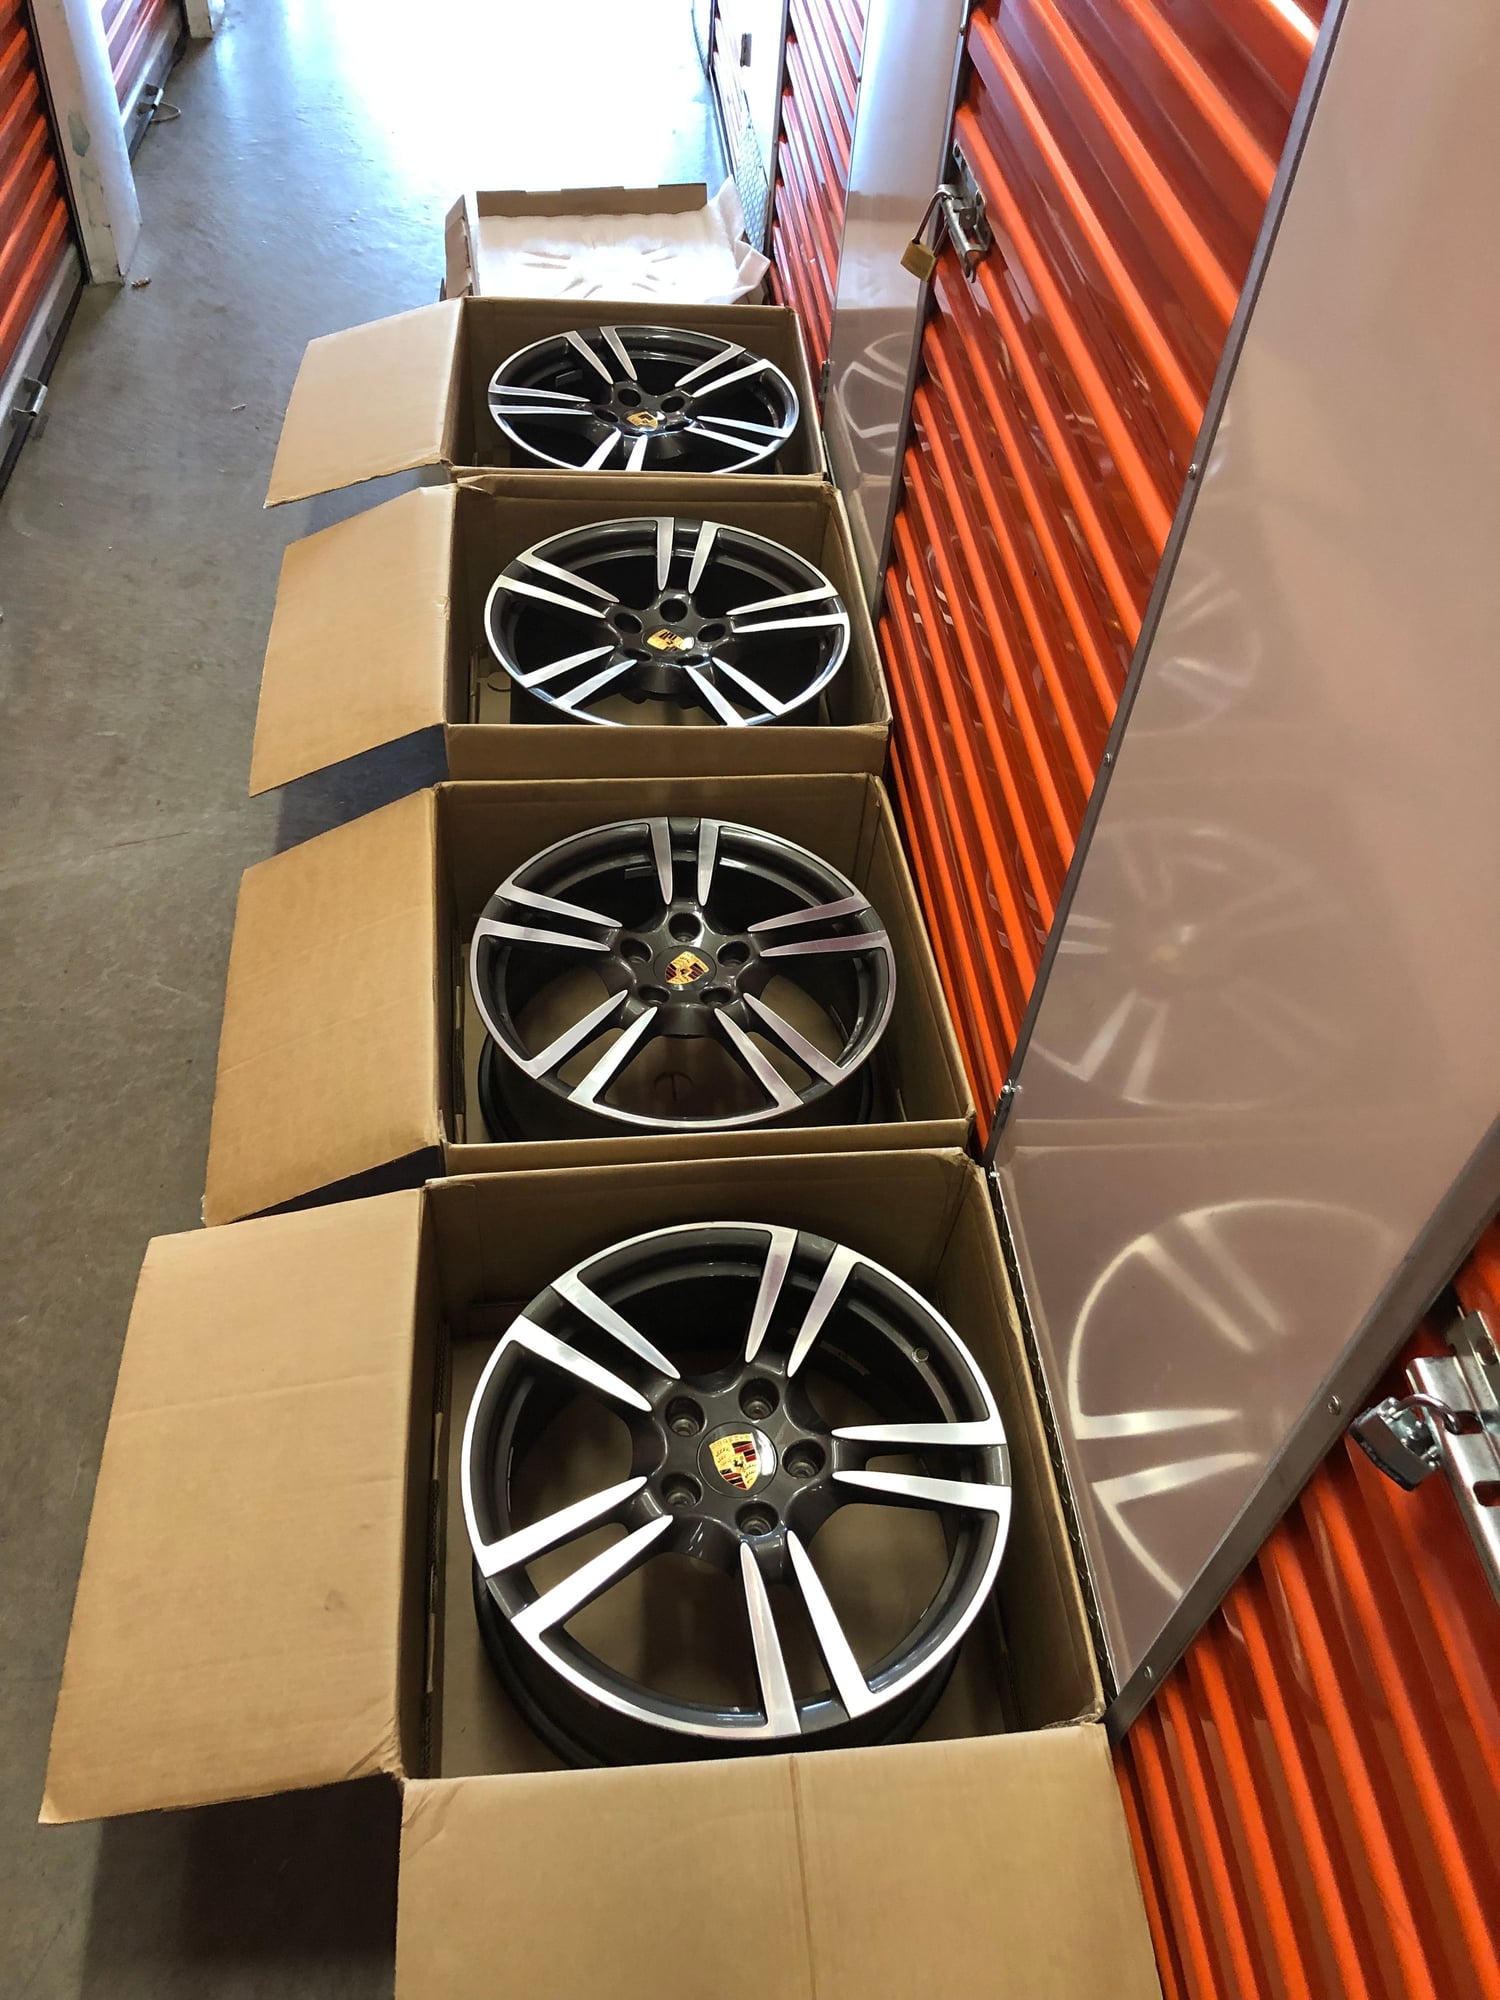 Wheels and Tires/Axles - Like new set of OEM Porsche Turbo II style wheels - Used - 2005 to 2012 Porsche 911 - New York, NY 10016, United States